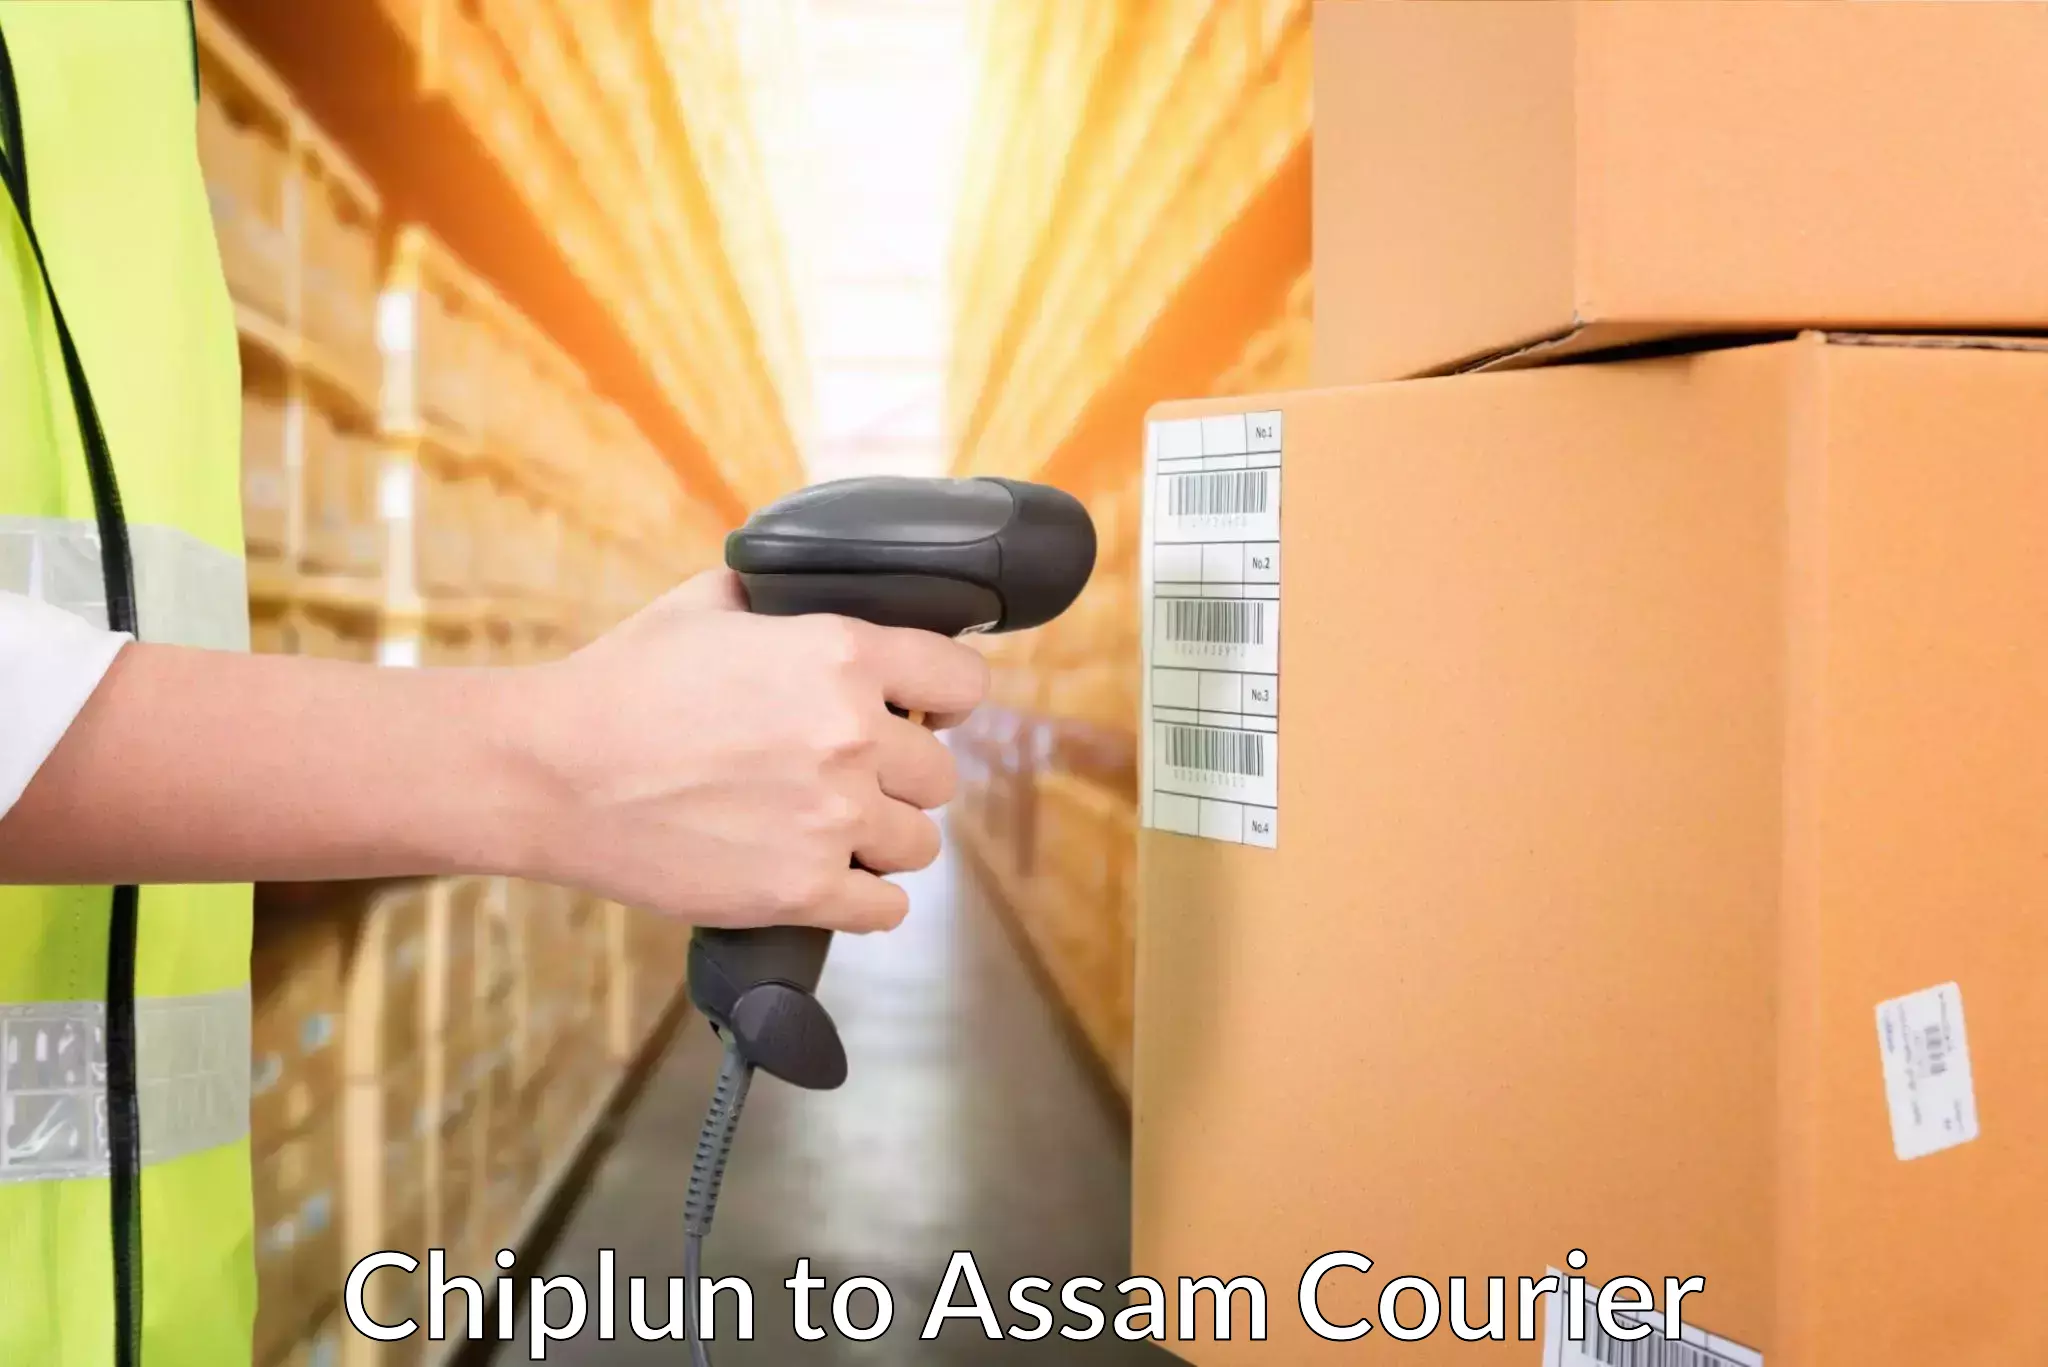 Next-day delivery options Chiplun to Assam